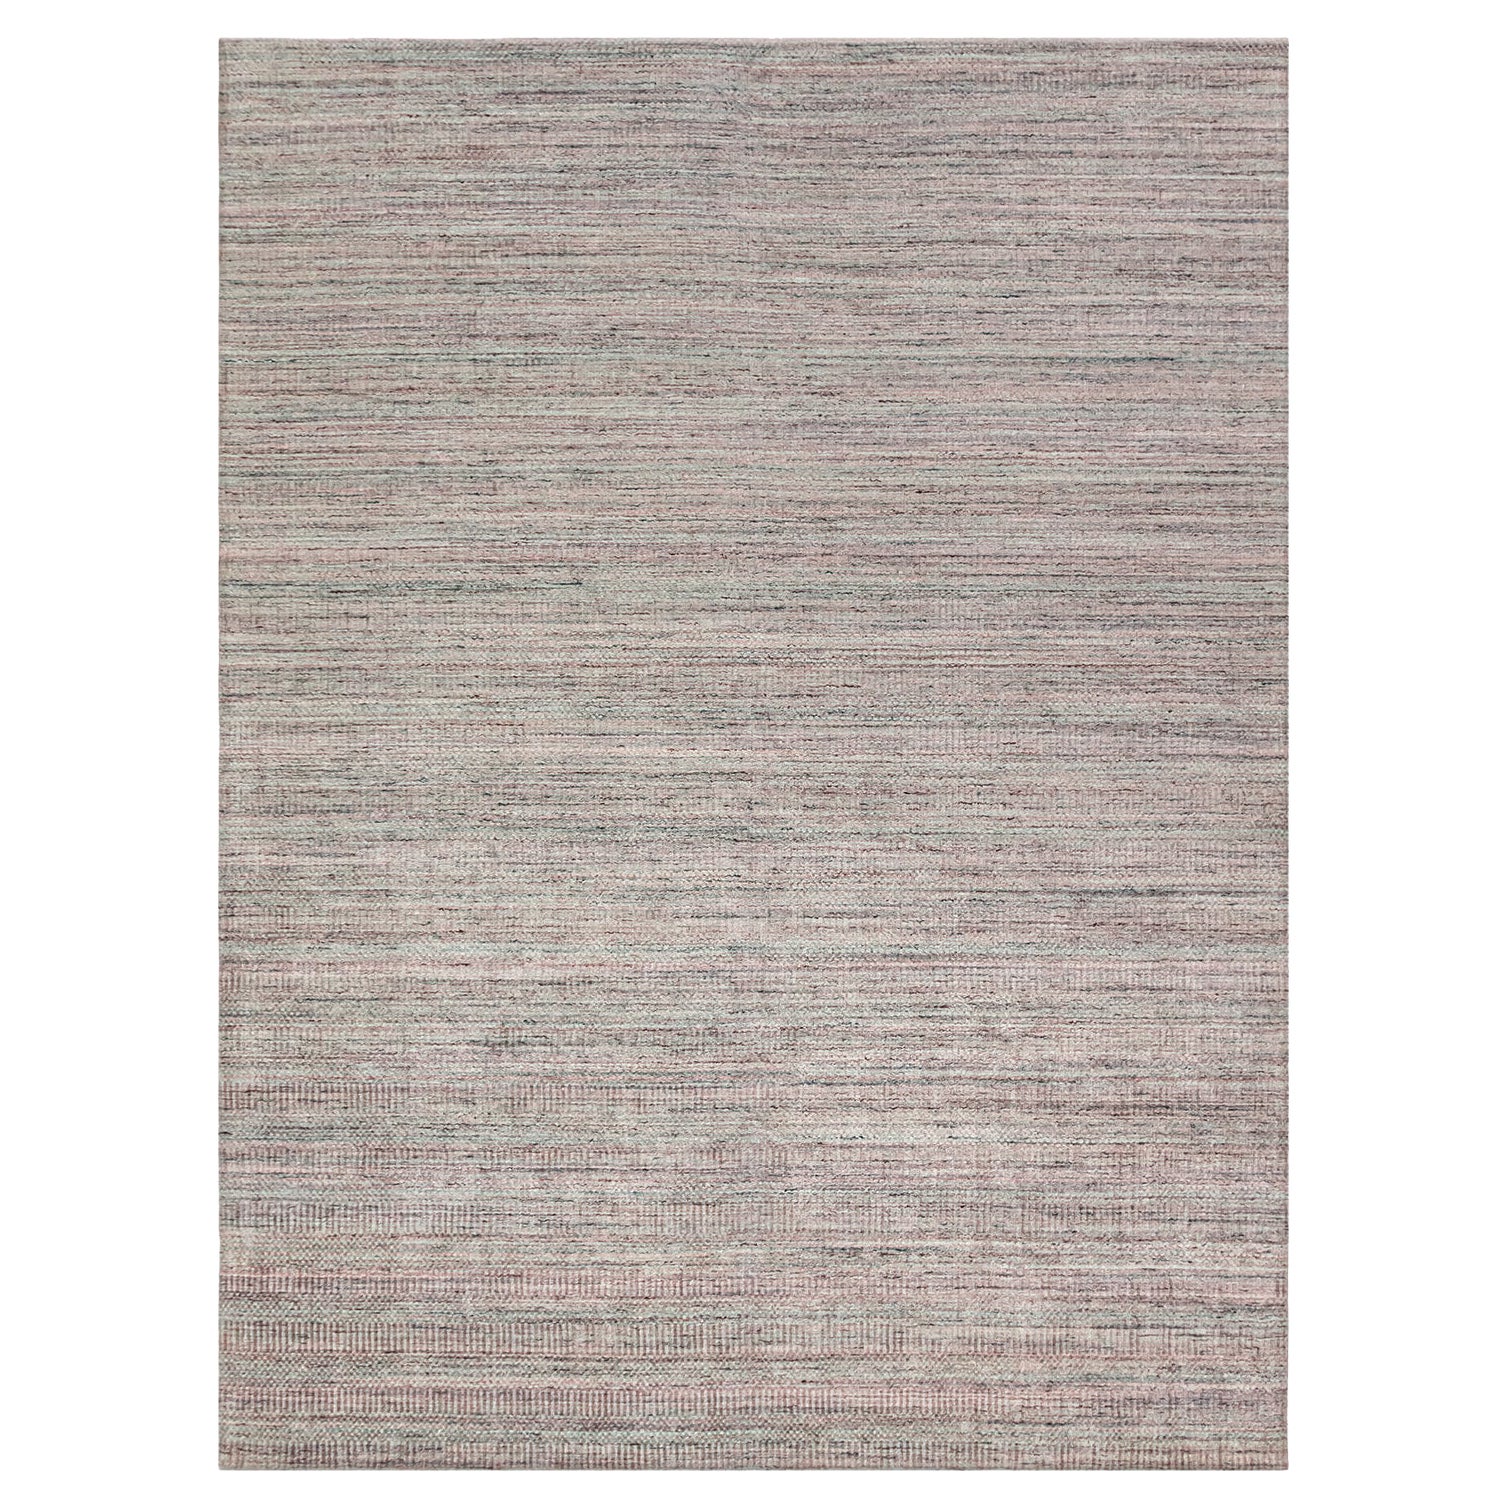 Simplicity Comfort Pink Turquoise Contemporary Handwoven Rug  9'2 x 12'